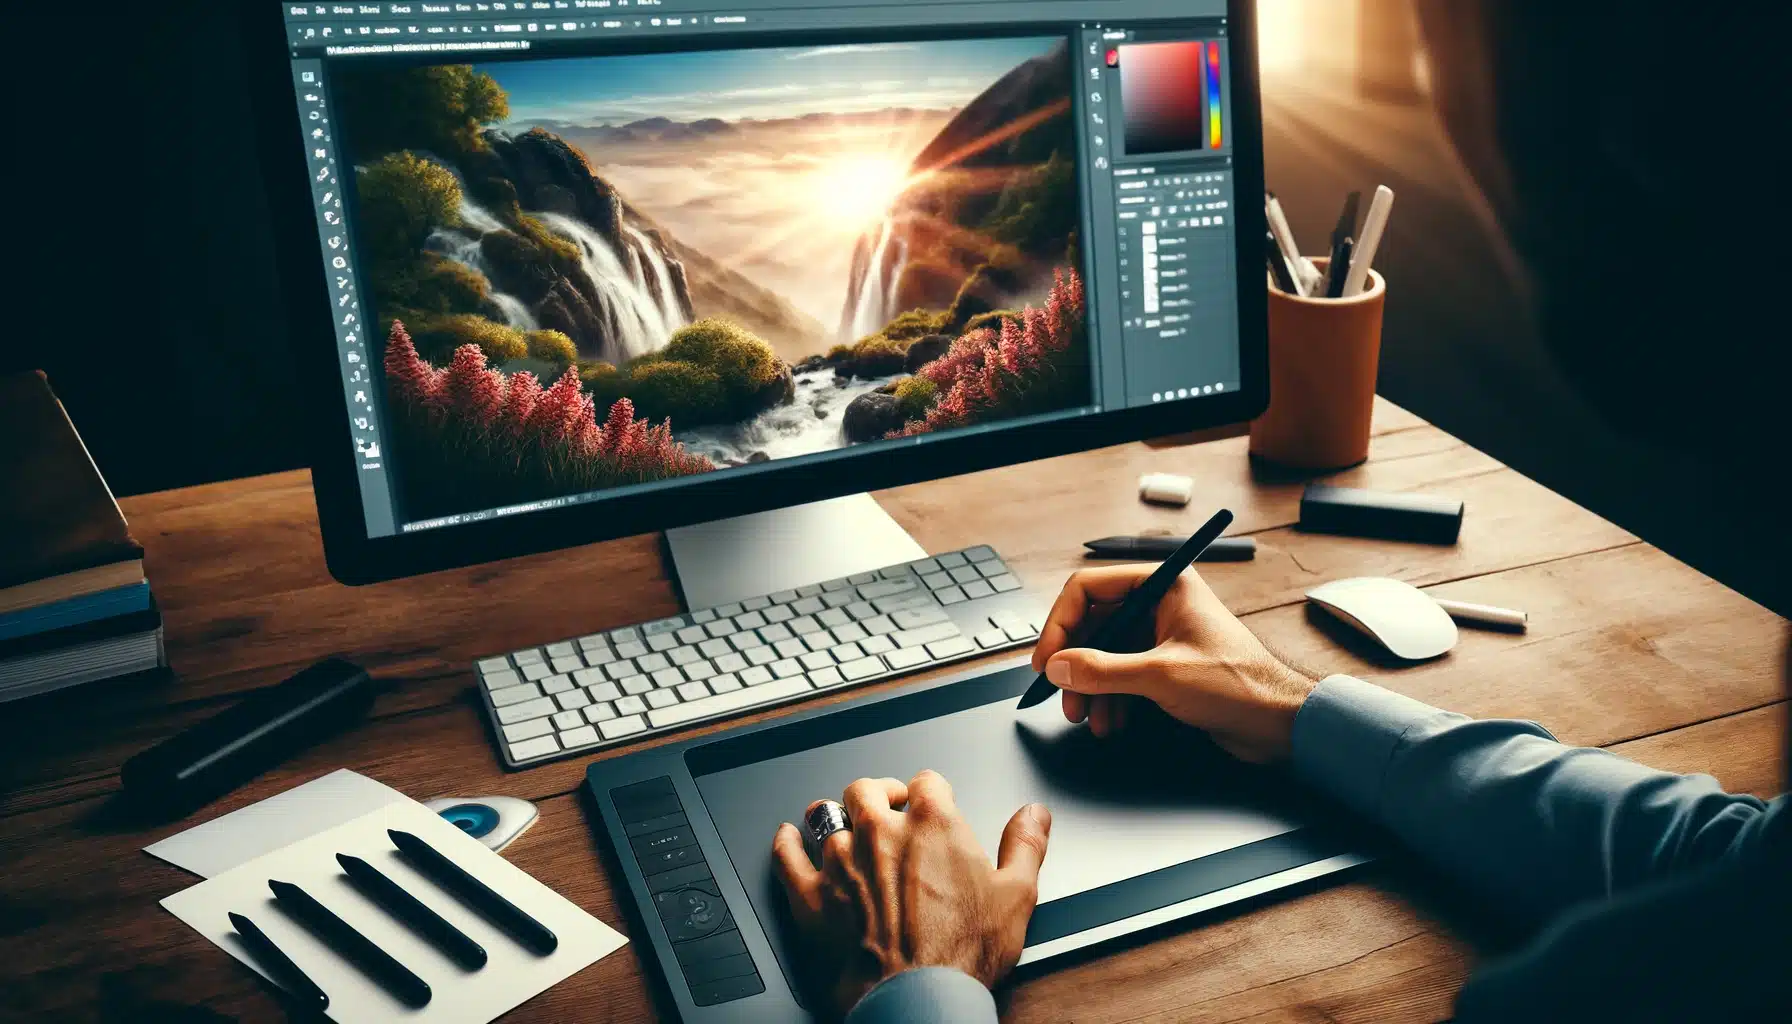 Close-up view of a man's hands using a graphic tablet and stylus to edit a scenic landscape photo in Adobe Photoshop, displayed on a computer monitor in a well-organized workspace.